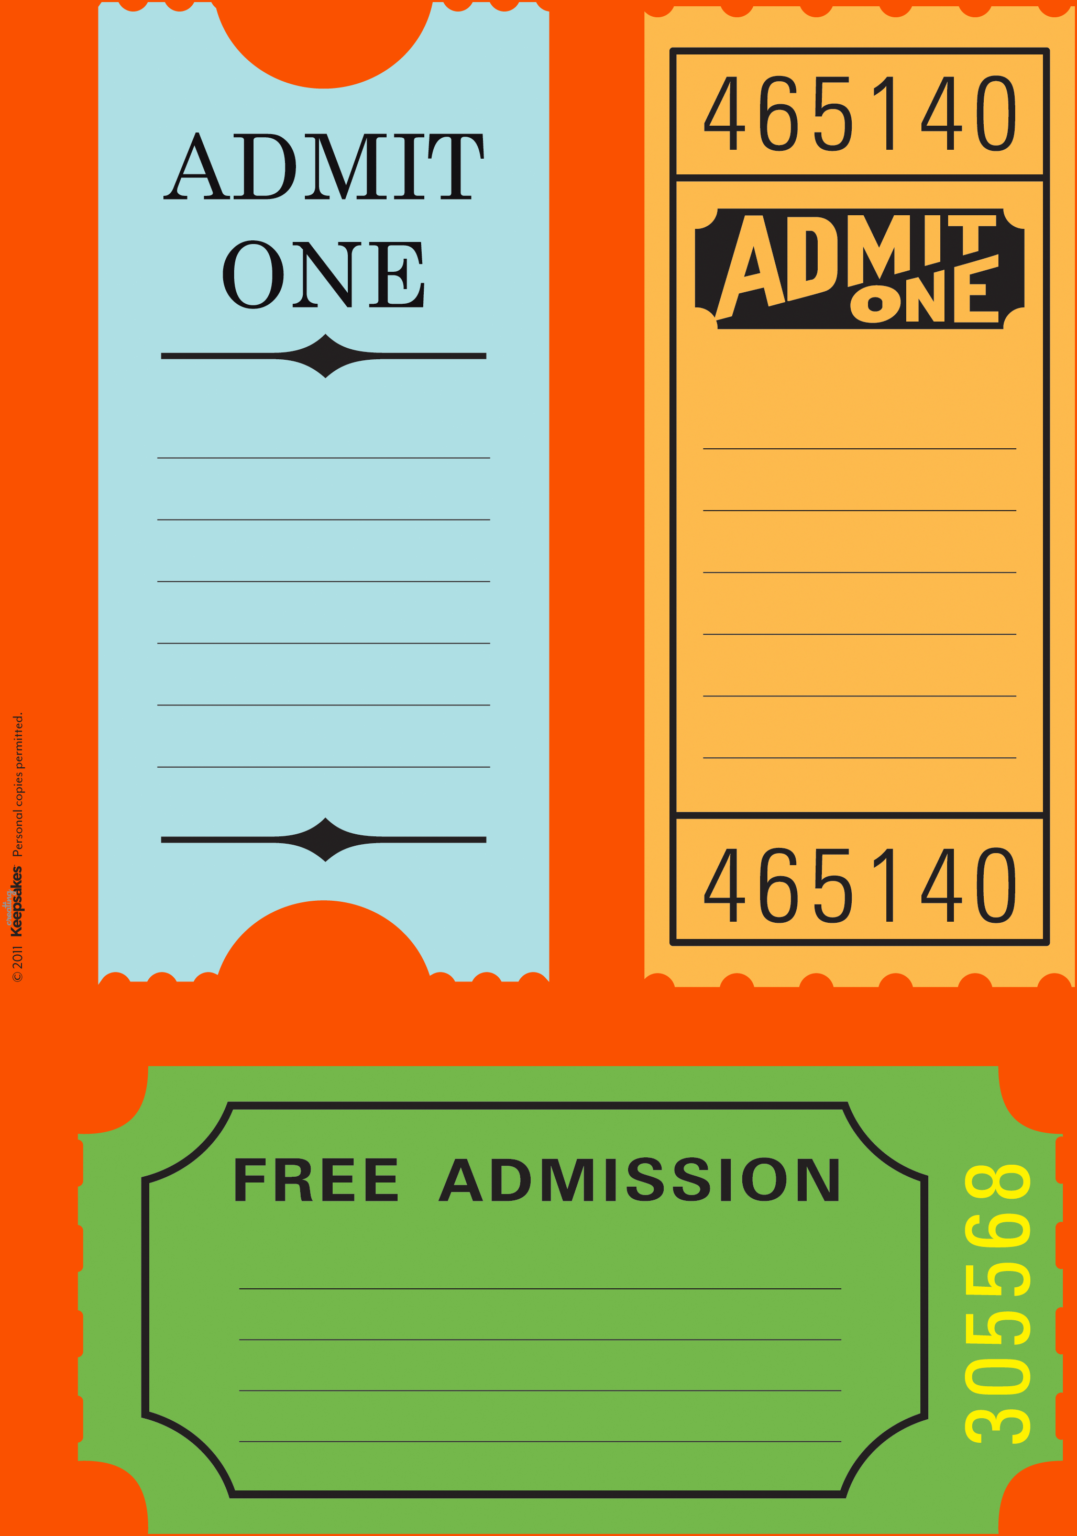 023-free-printable-ticket-templates-travel-tickets-intended-for-blank-admission-ticket-template